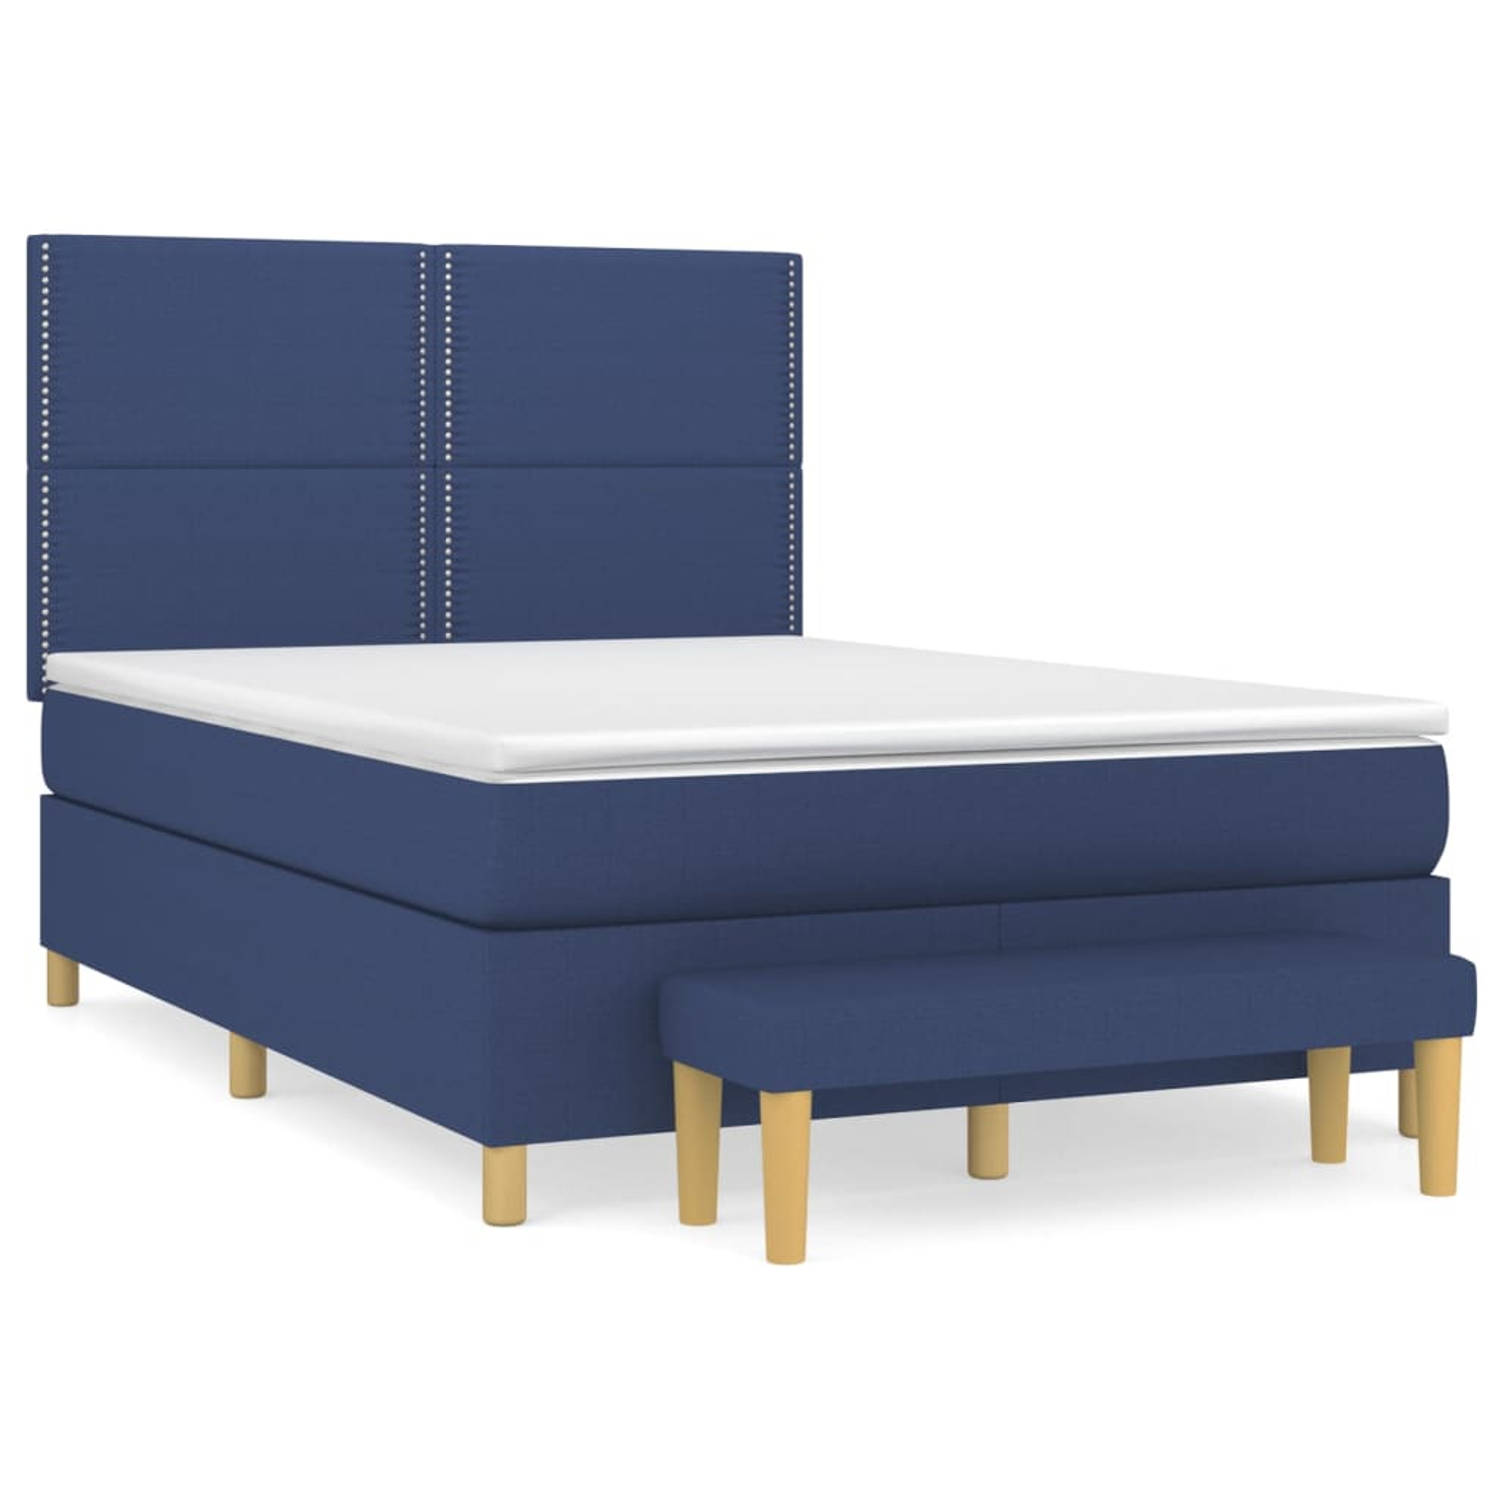 The Living Store Boxspring met matras stof blauw 140x200 cm - Boxspring - Boxsprings - Pocketveringbed - Bed - Slaapmeubel - Boxspringbed - Boxspring Bed - Eenpersoonsbed - Bed Met